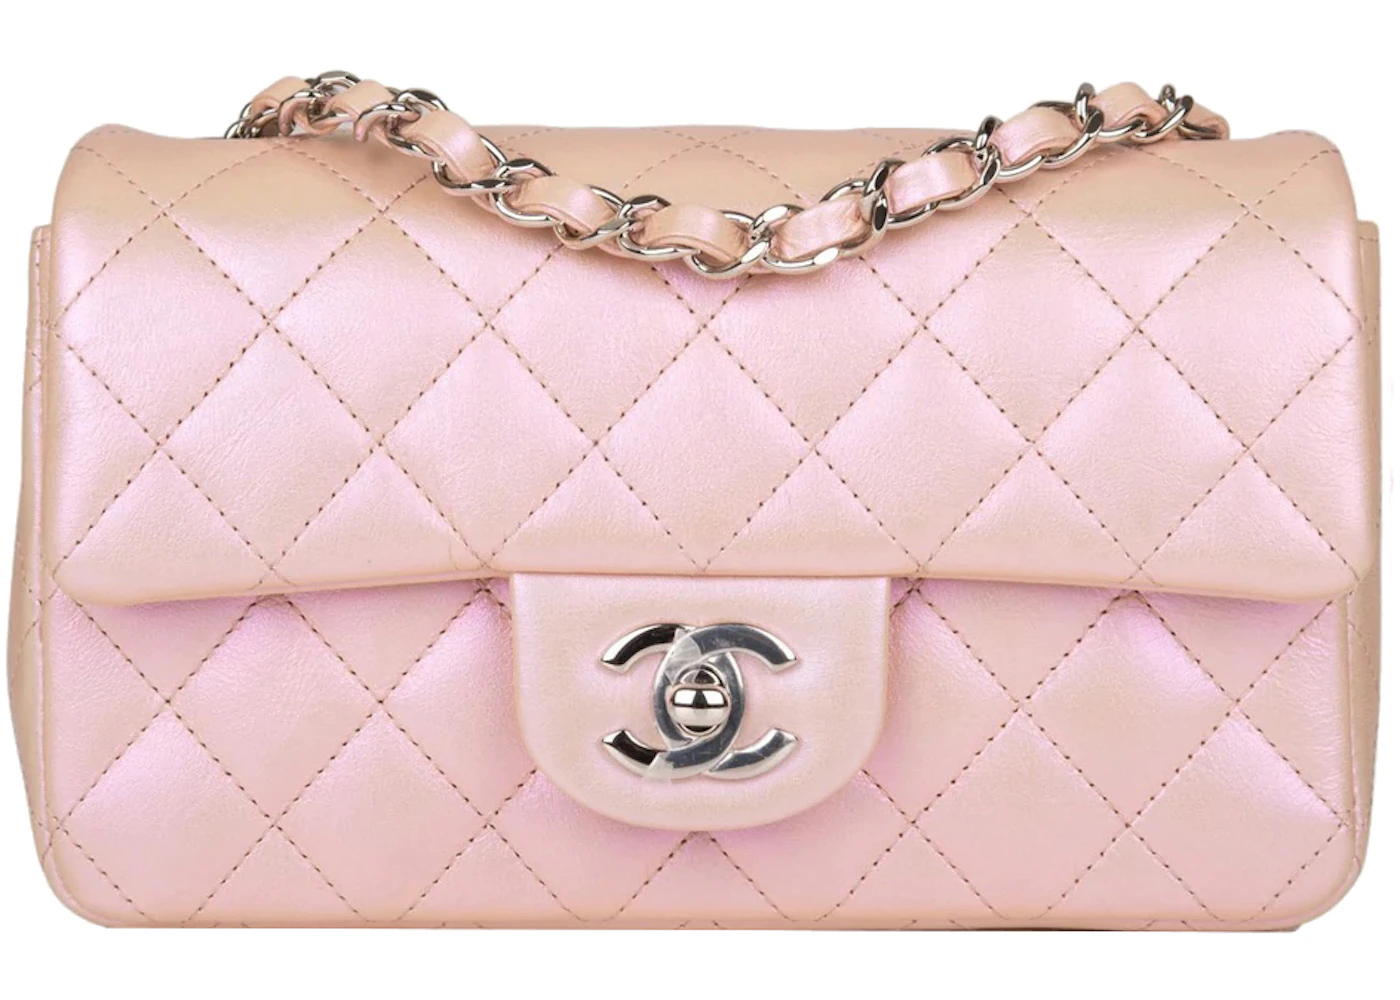 pink chanel bag for sale